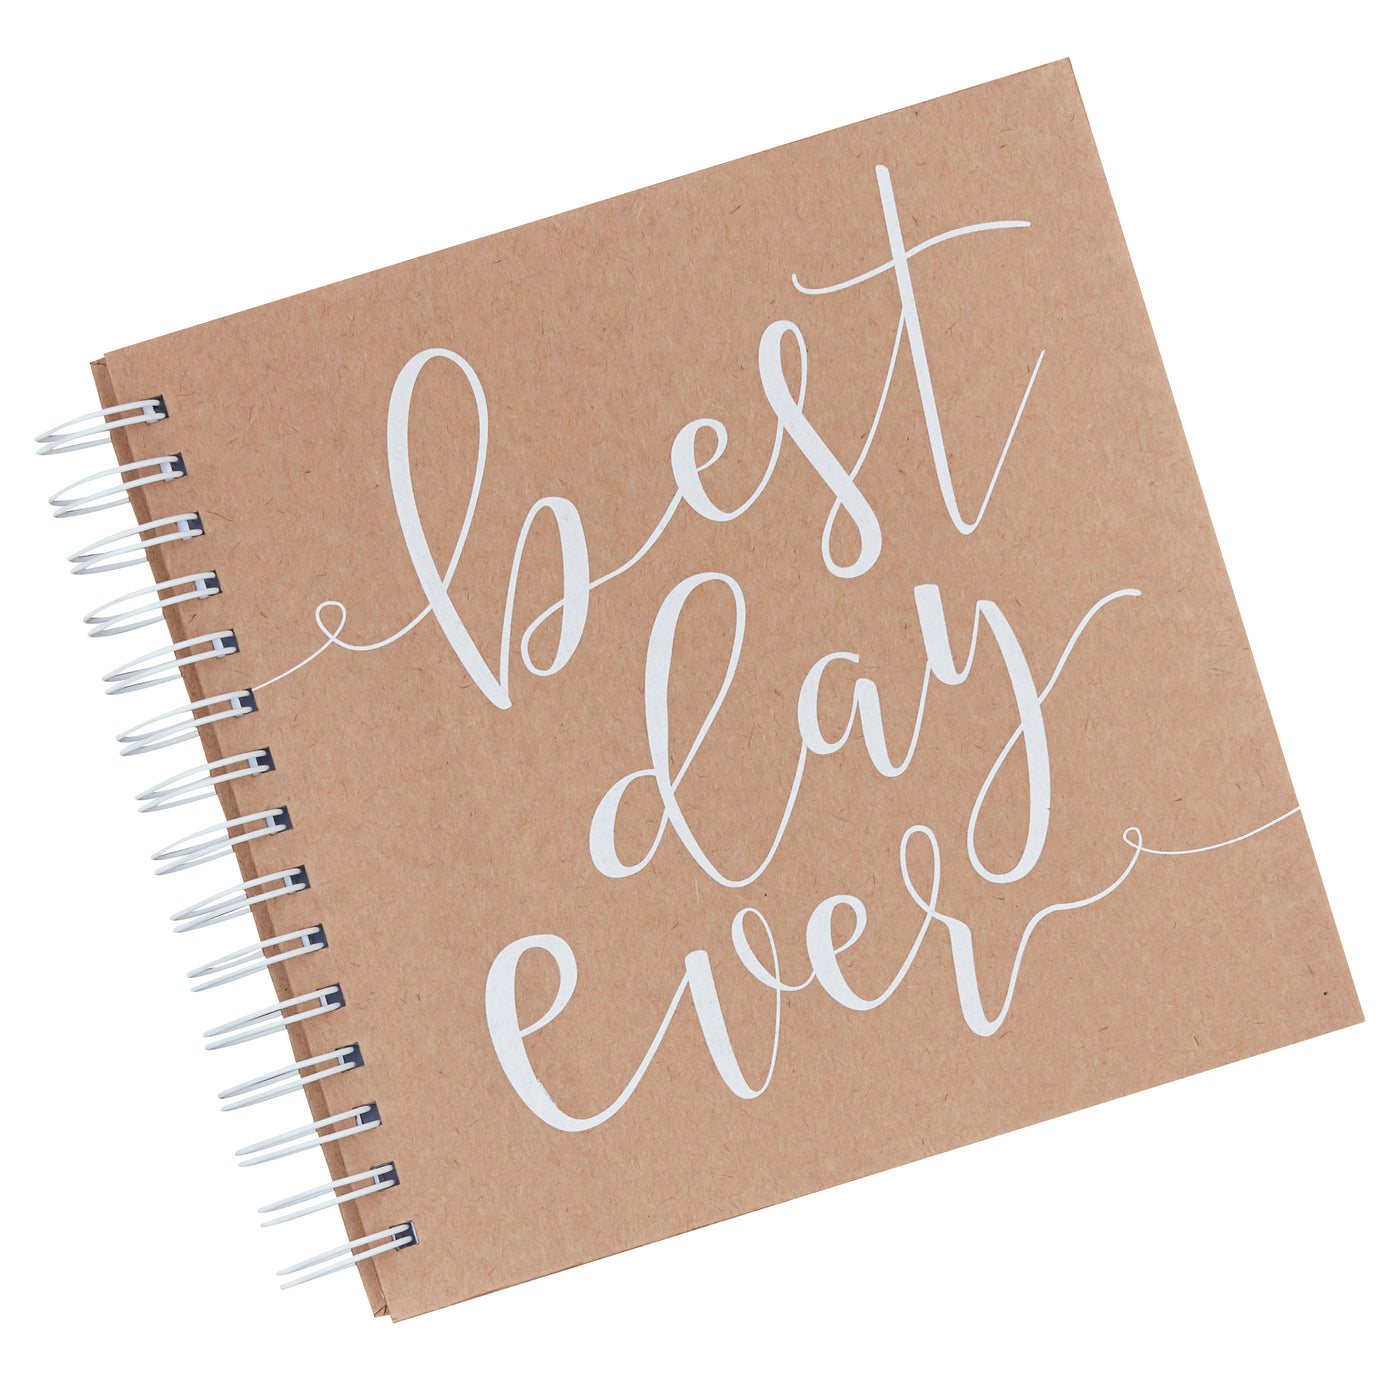 Best Day Ever Envelope Guest Book